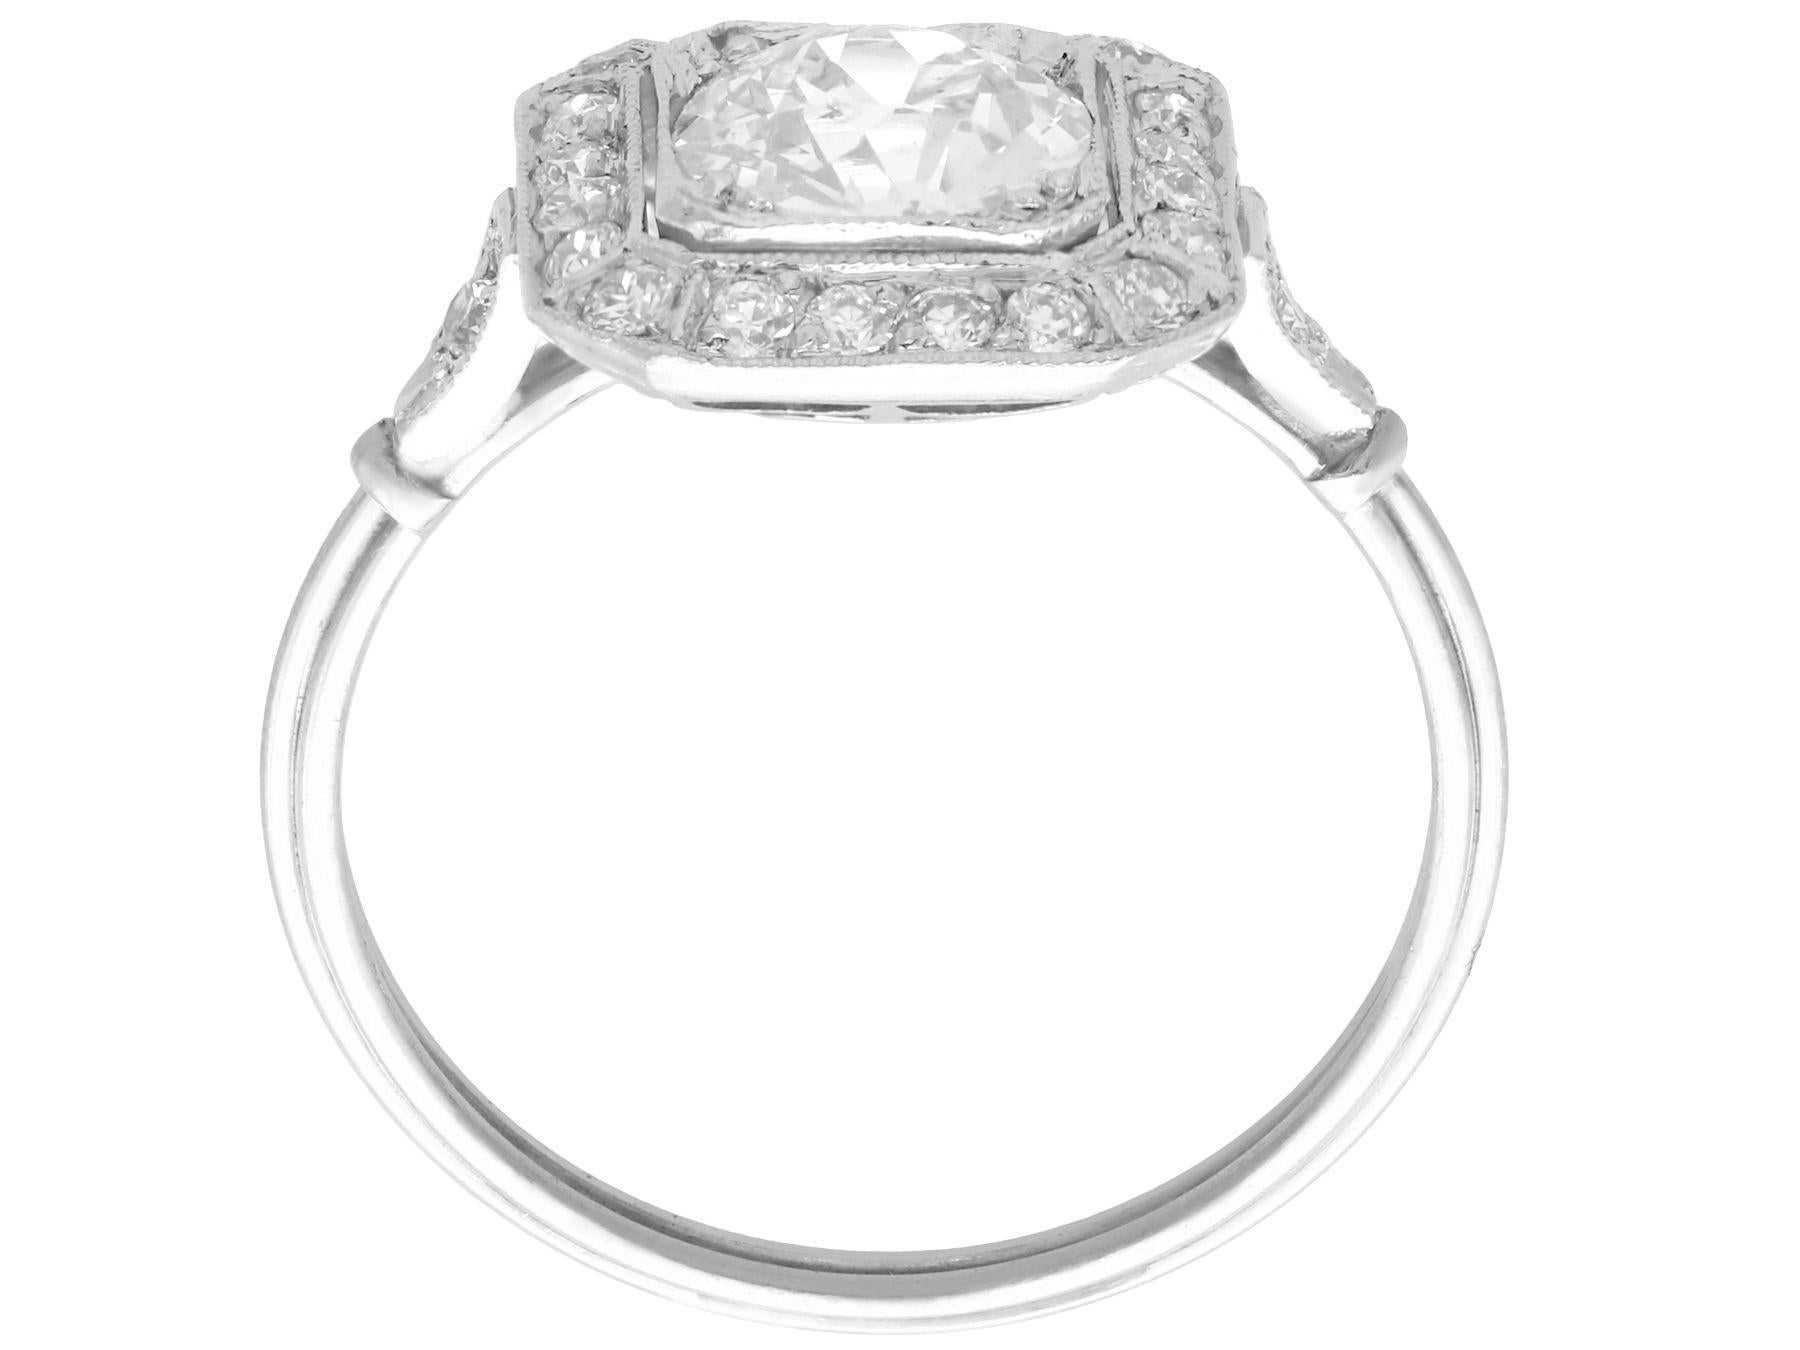 Women's 1.37 Carat Diamond and Platinum Cocktail Ring For Sale